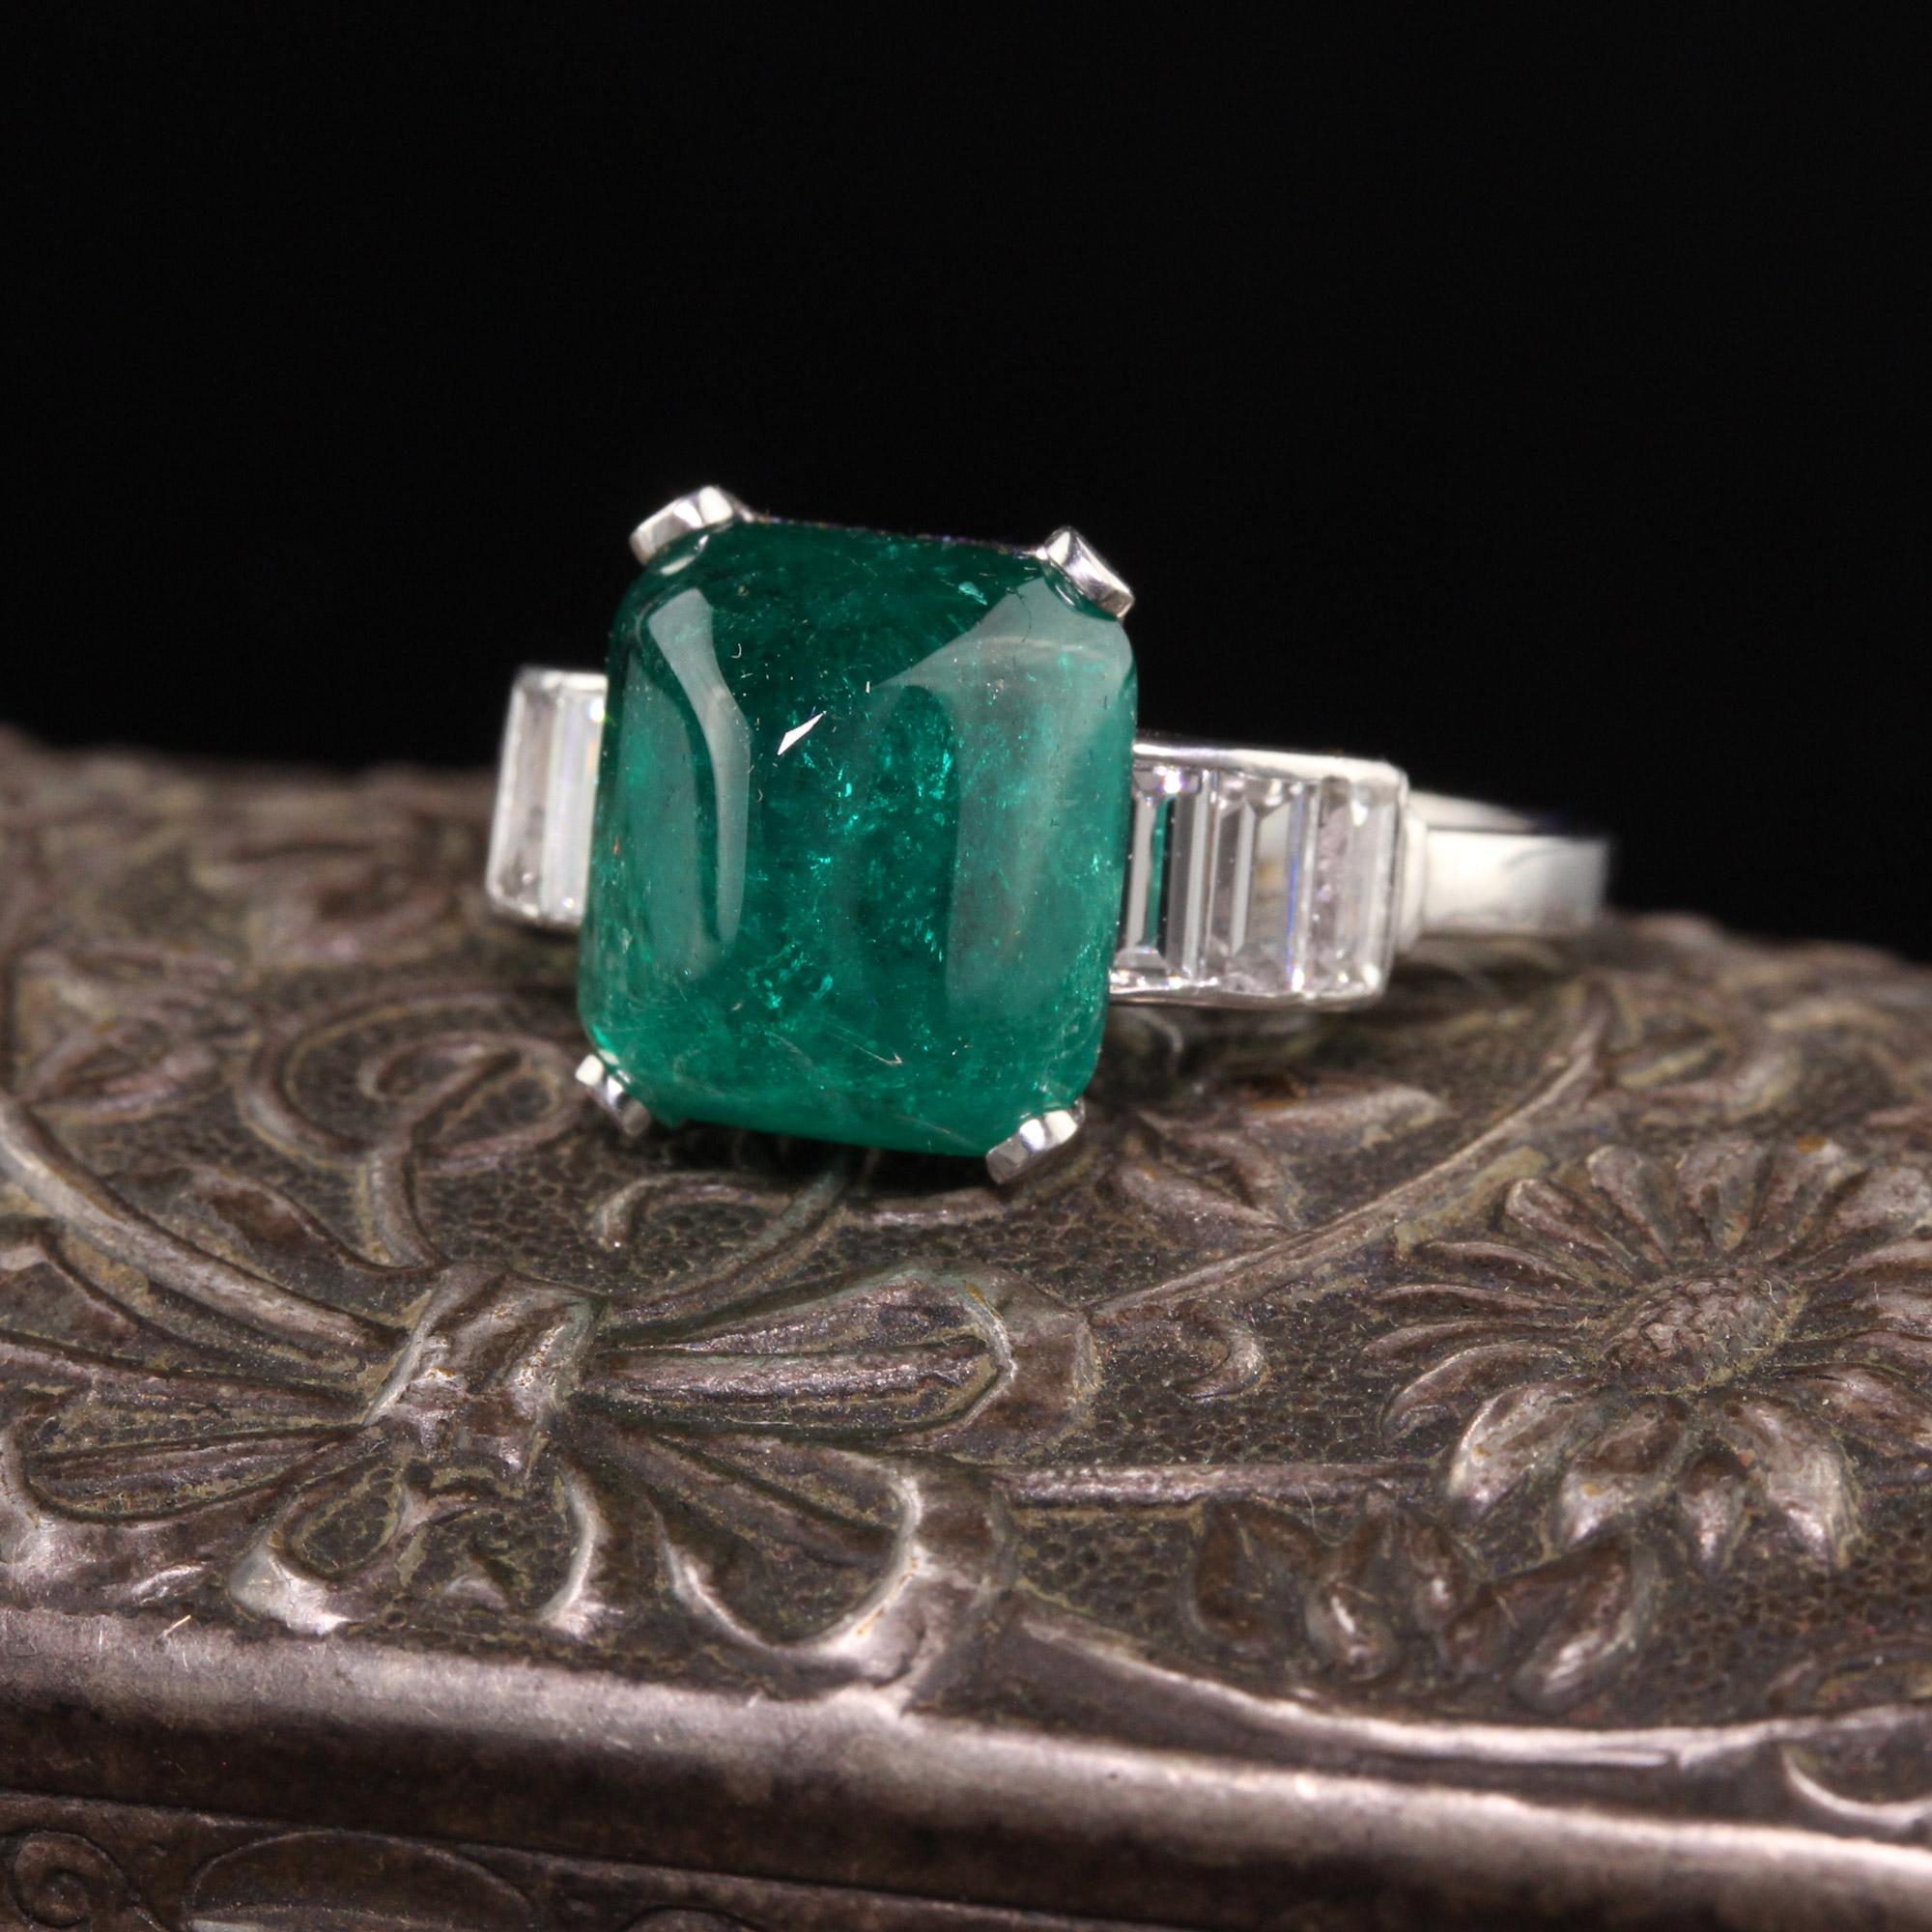 Beautiful Antique Art Deco Platinum Sugarloaf Emerald and Baguette Diamond Ring. This stunning ring has a large 4.73 ct sugarloaf emerald in a deep green color that is set in a platinum diamond baguette mounting. A truly rare and incredible